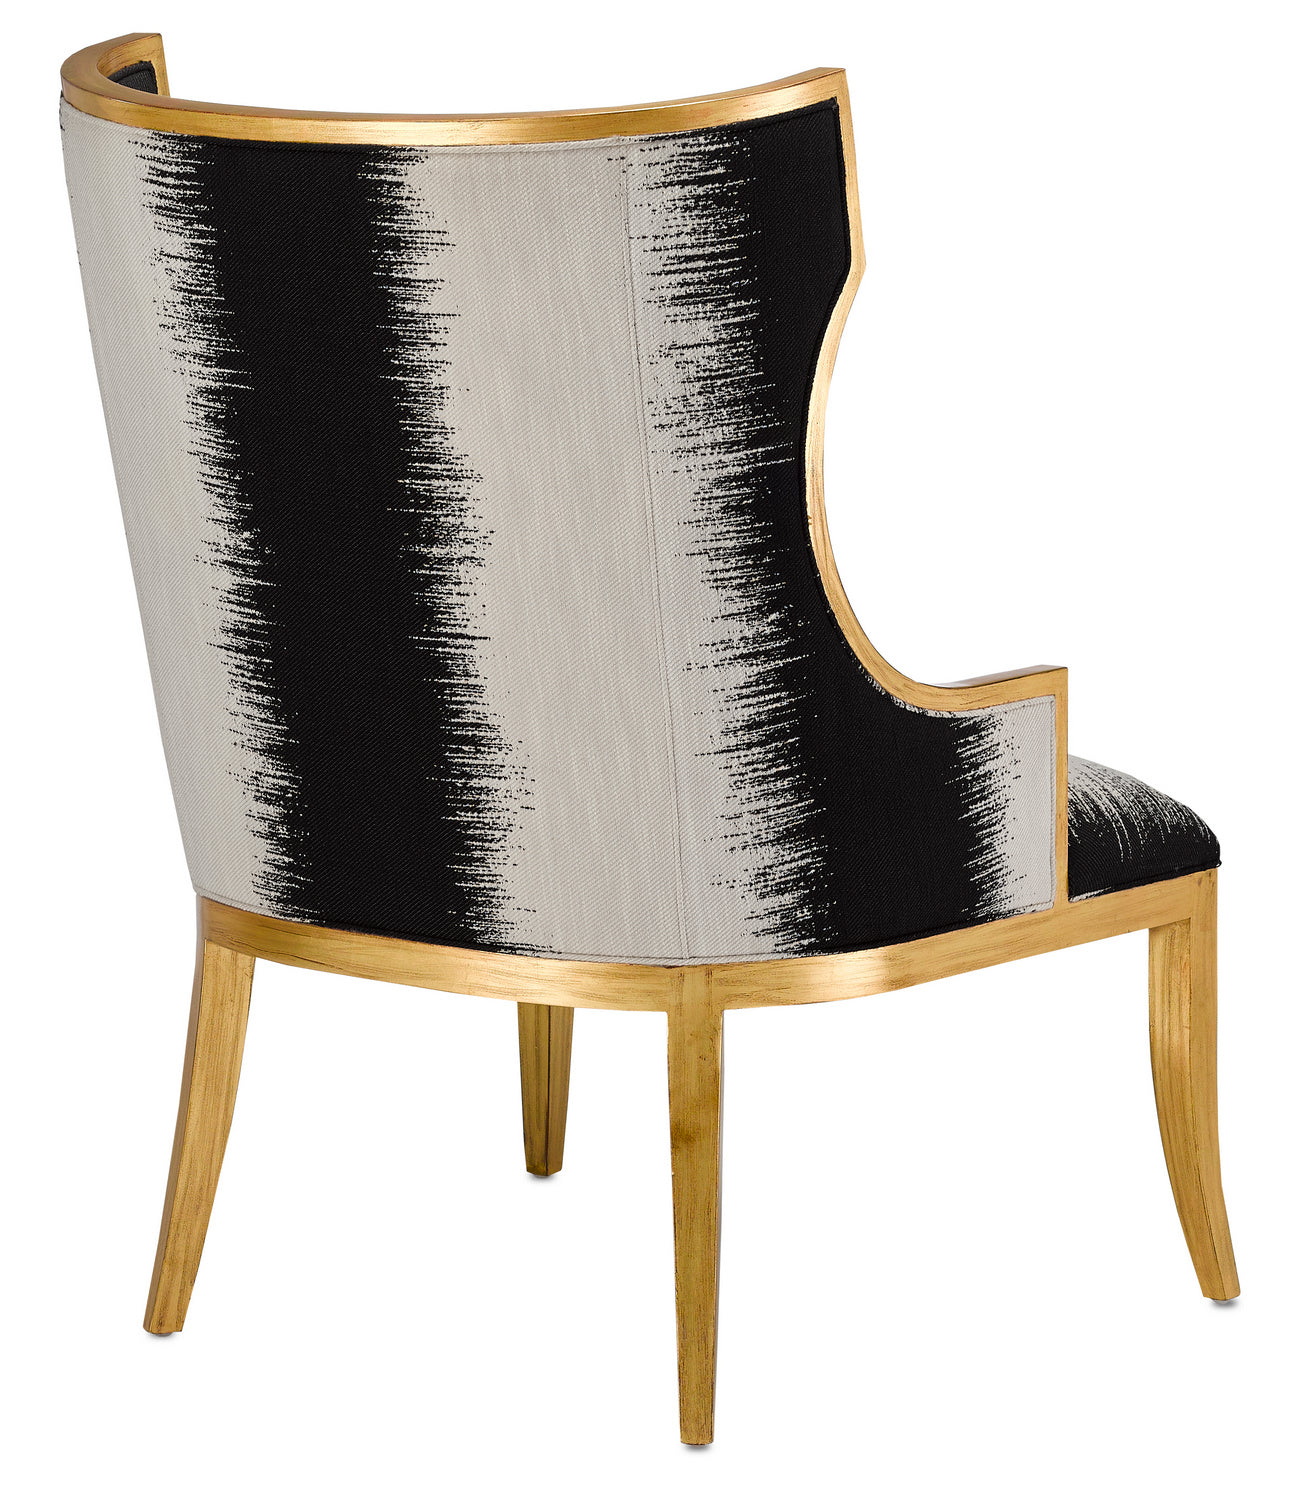 Chair from the Garson collection in Antique Gold finish